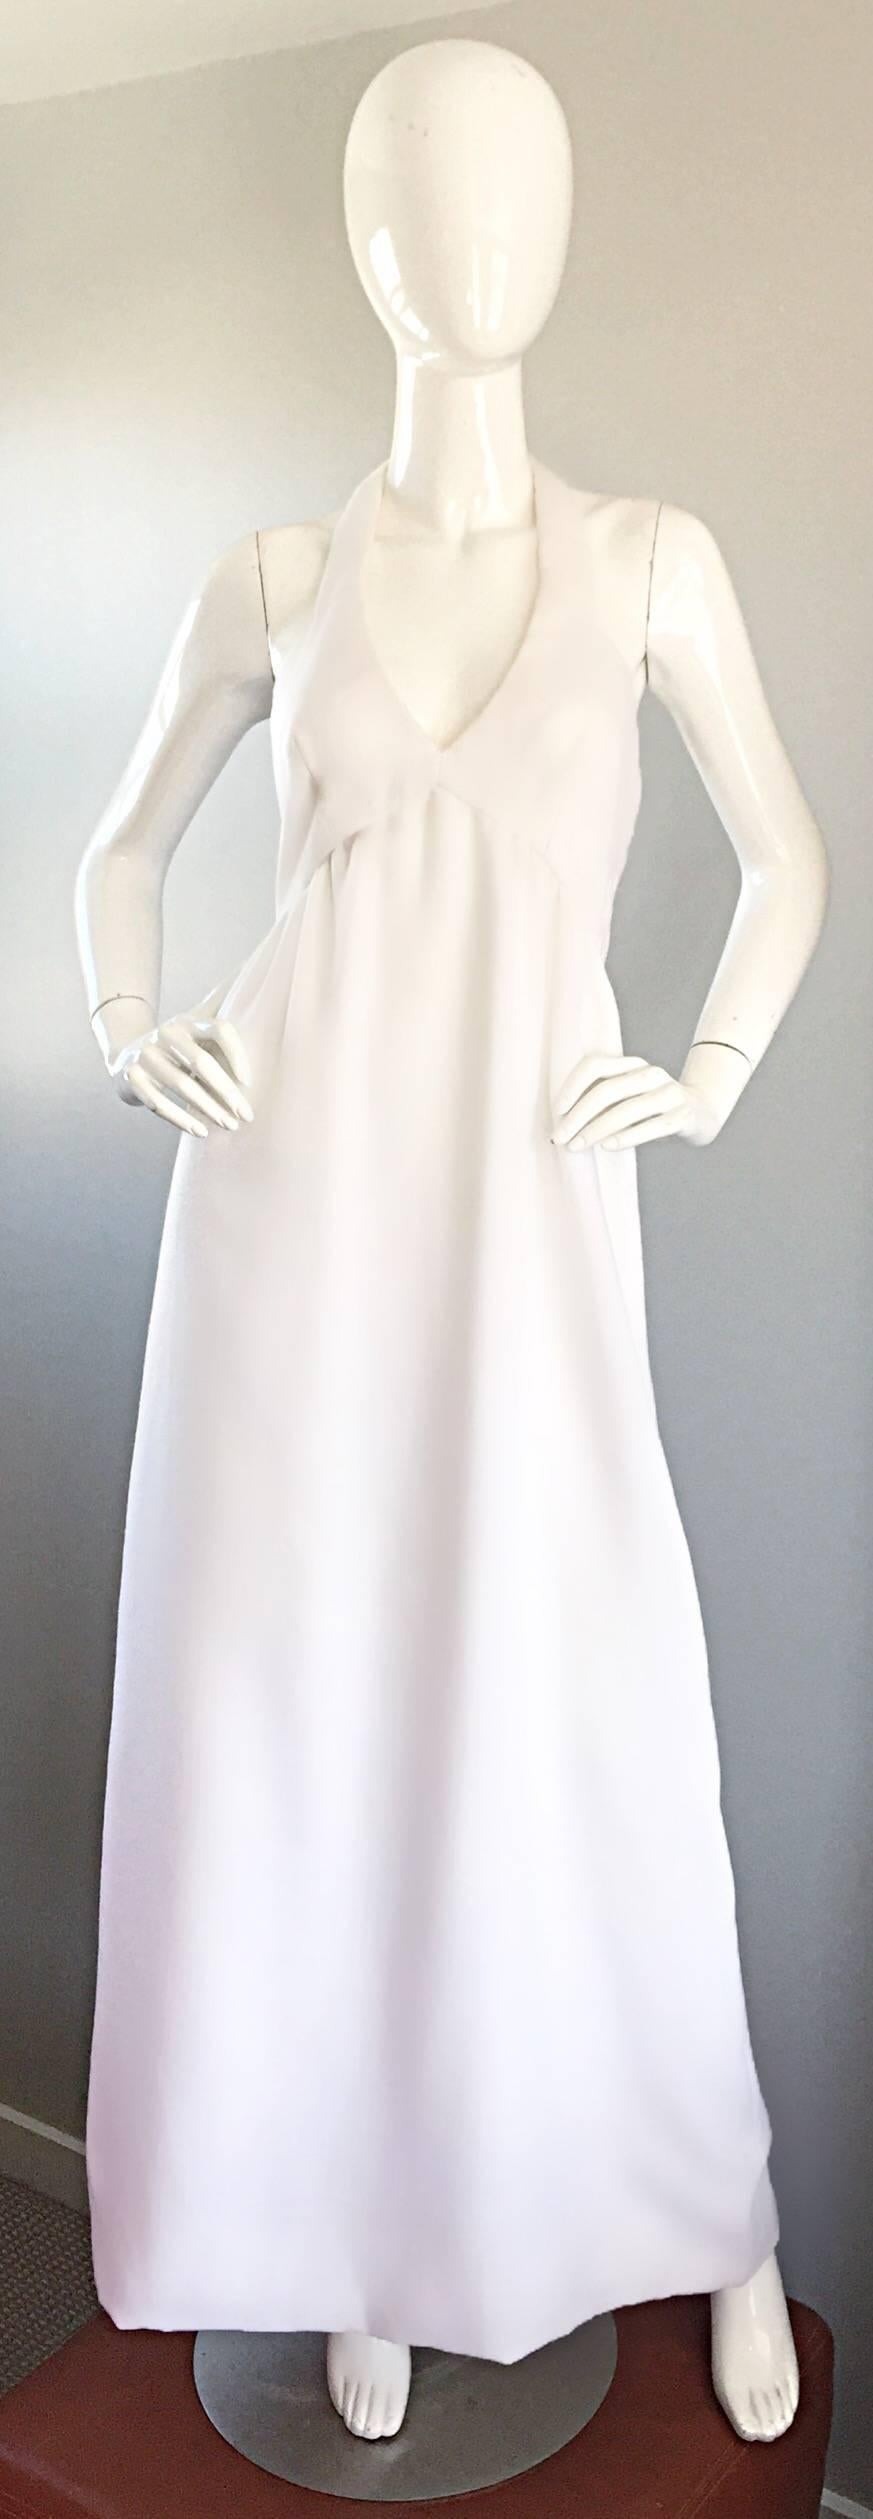 Beautiful vintage MOLLIE PARNIS 1970s white linen maxi dress! Luxurious Irish linen that drapes the body perfectly! Empire waist is super flattering and easy to wear. Fully lined in silk. Metal zipper up the back with hook-and-eye closures at top